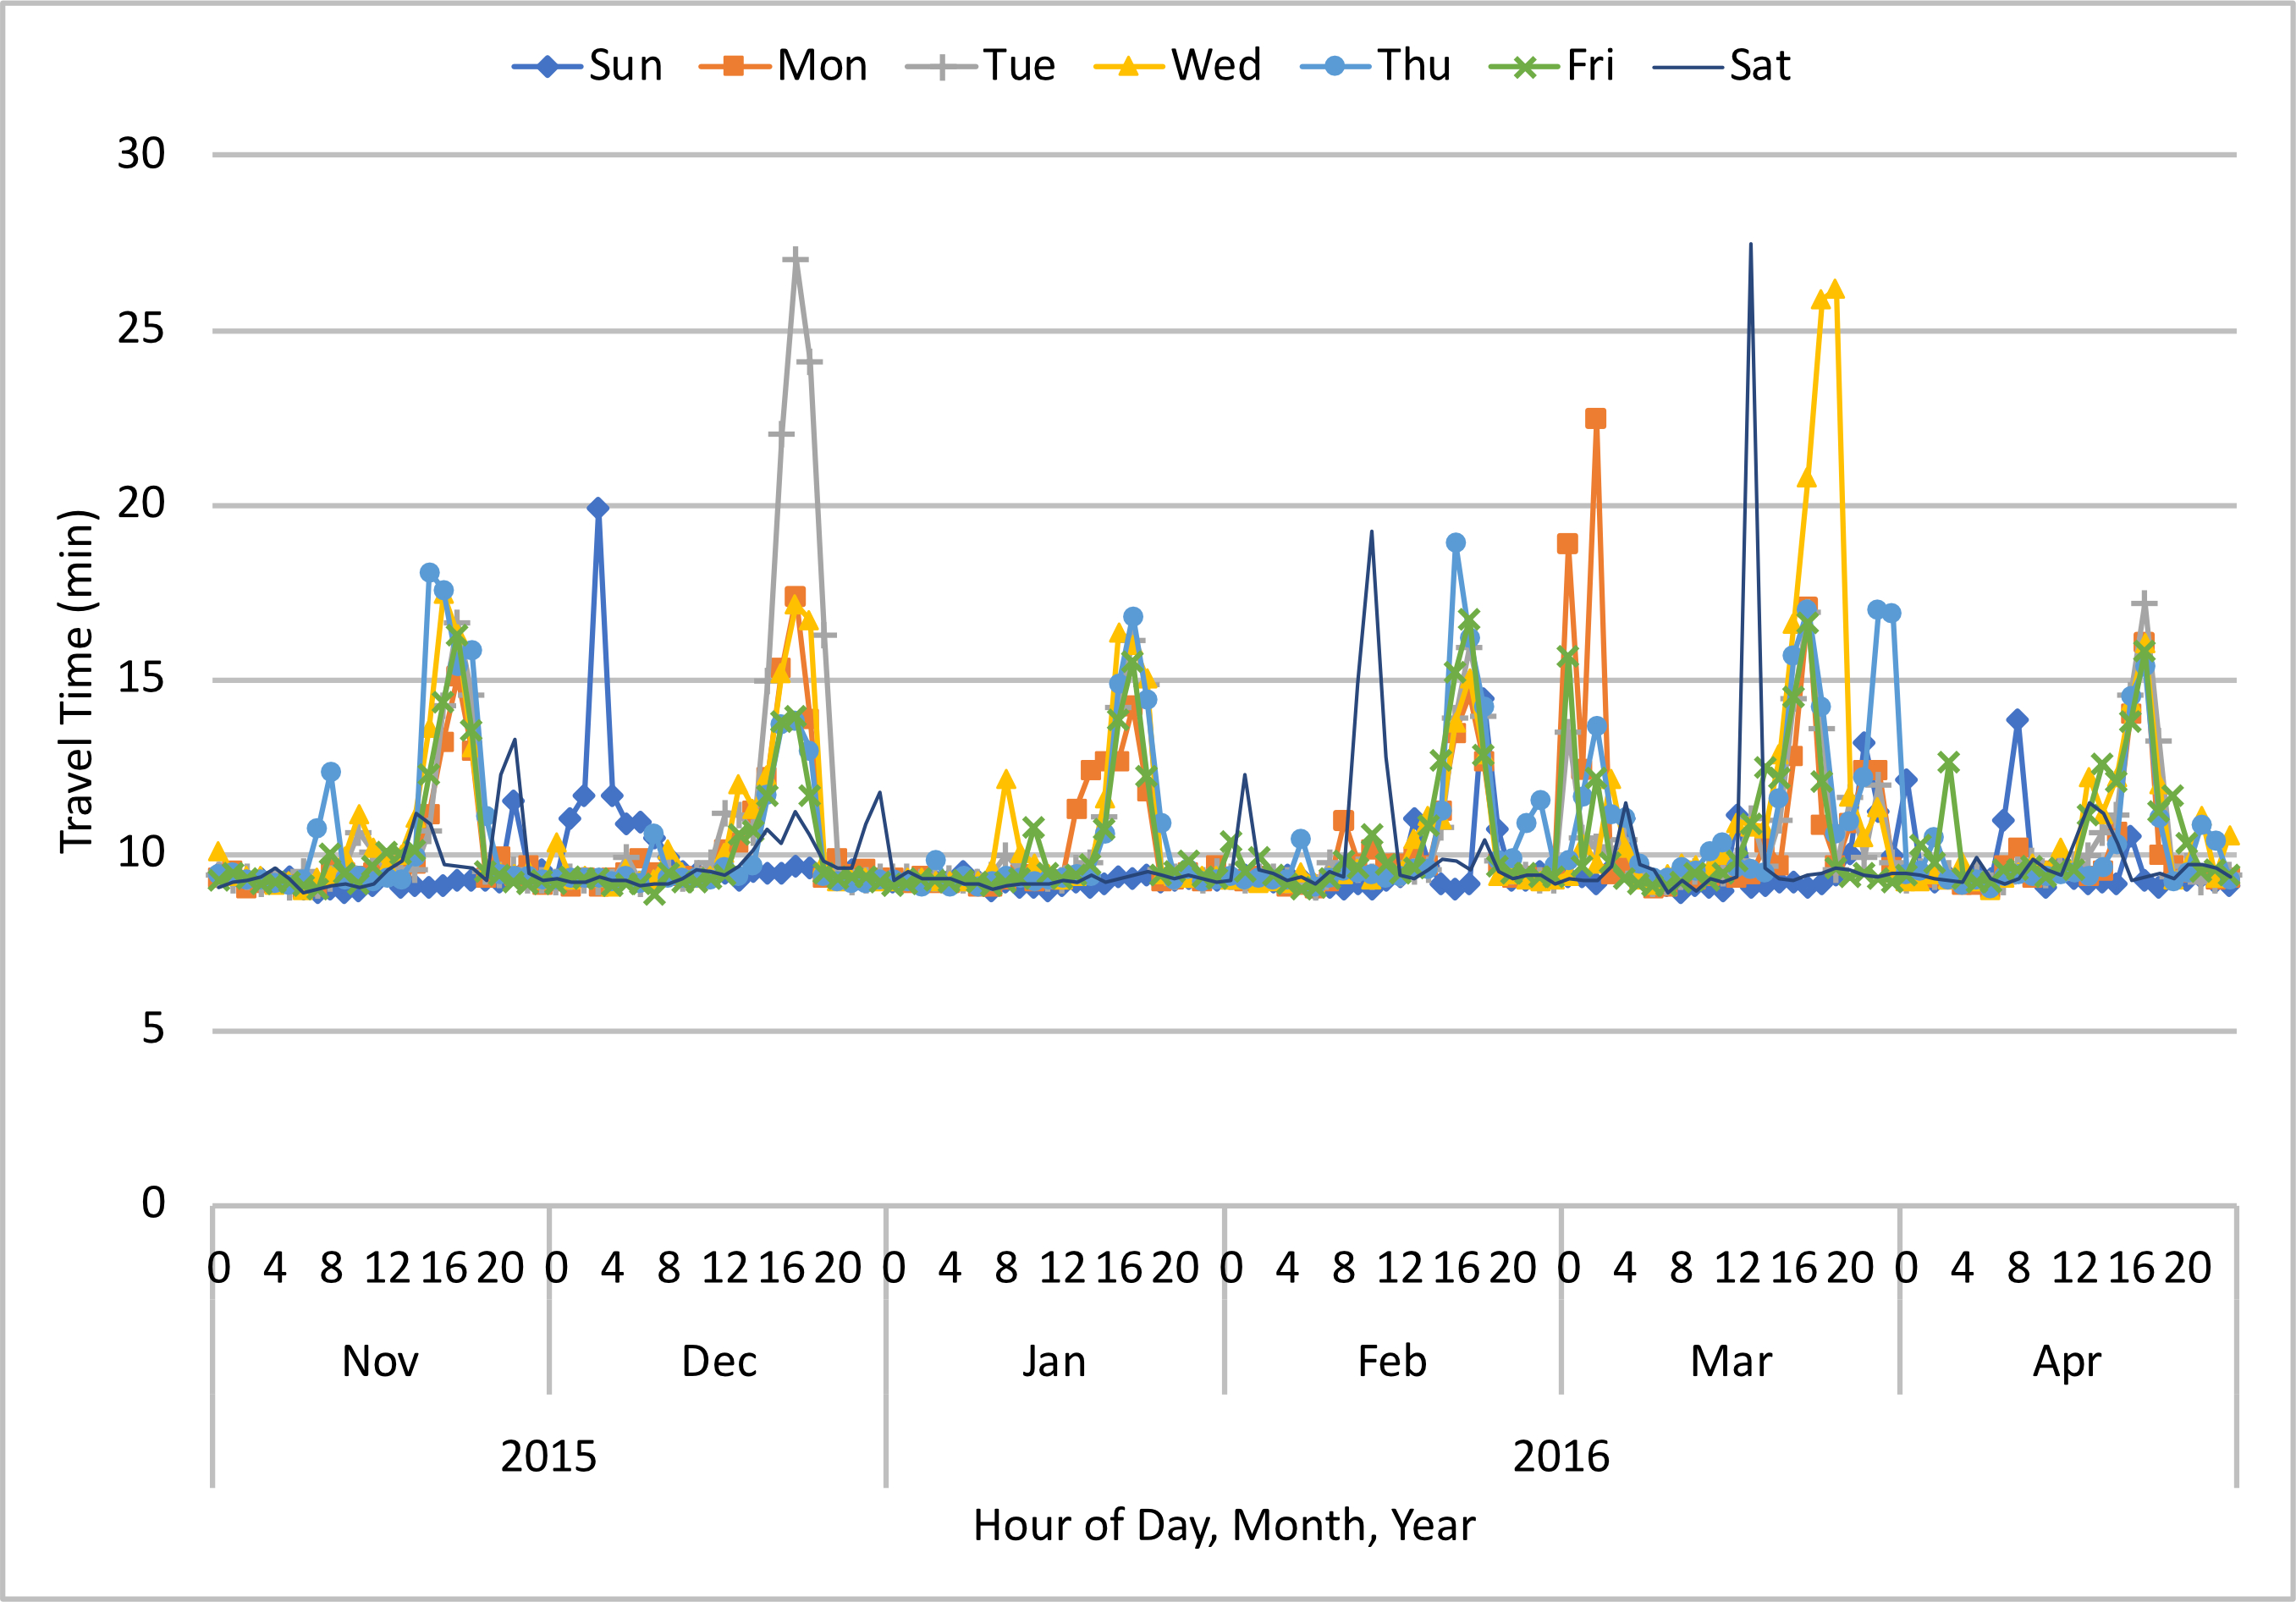 A line graph is shown for average travel time by day of week and hour of day for each month between November and April. Units are in minutes.  Travel times range from about 9 to 28, with most of them between 9 and 13.  Travel times are lowest in January and highest in March.